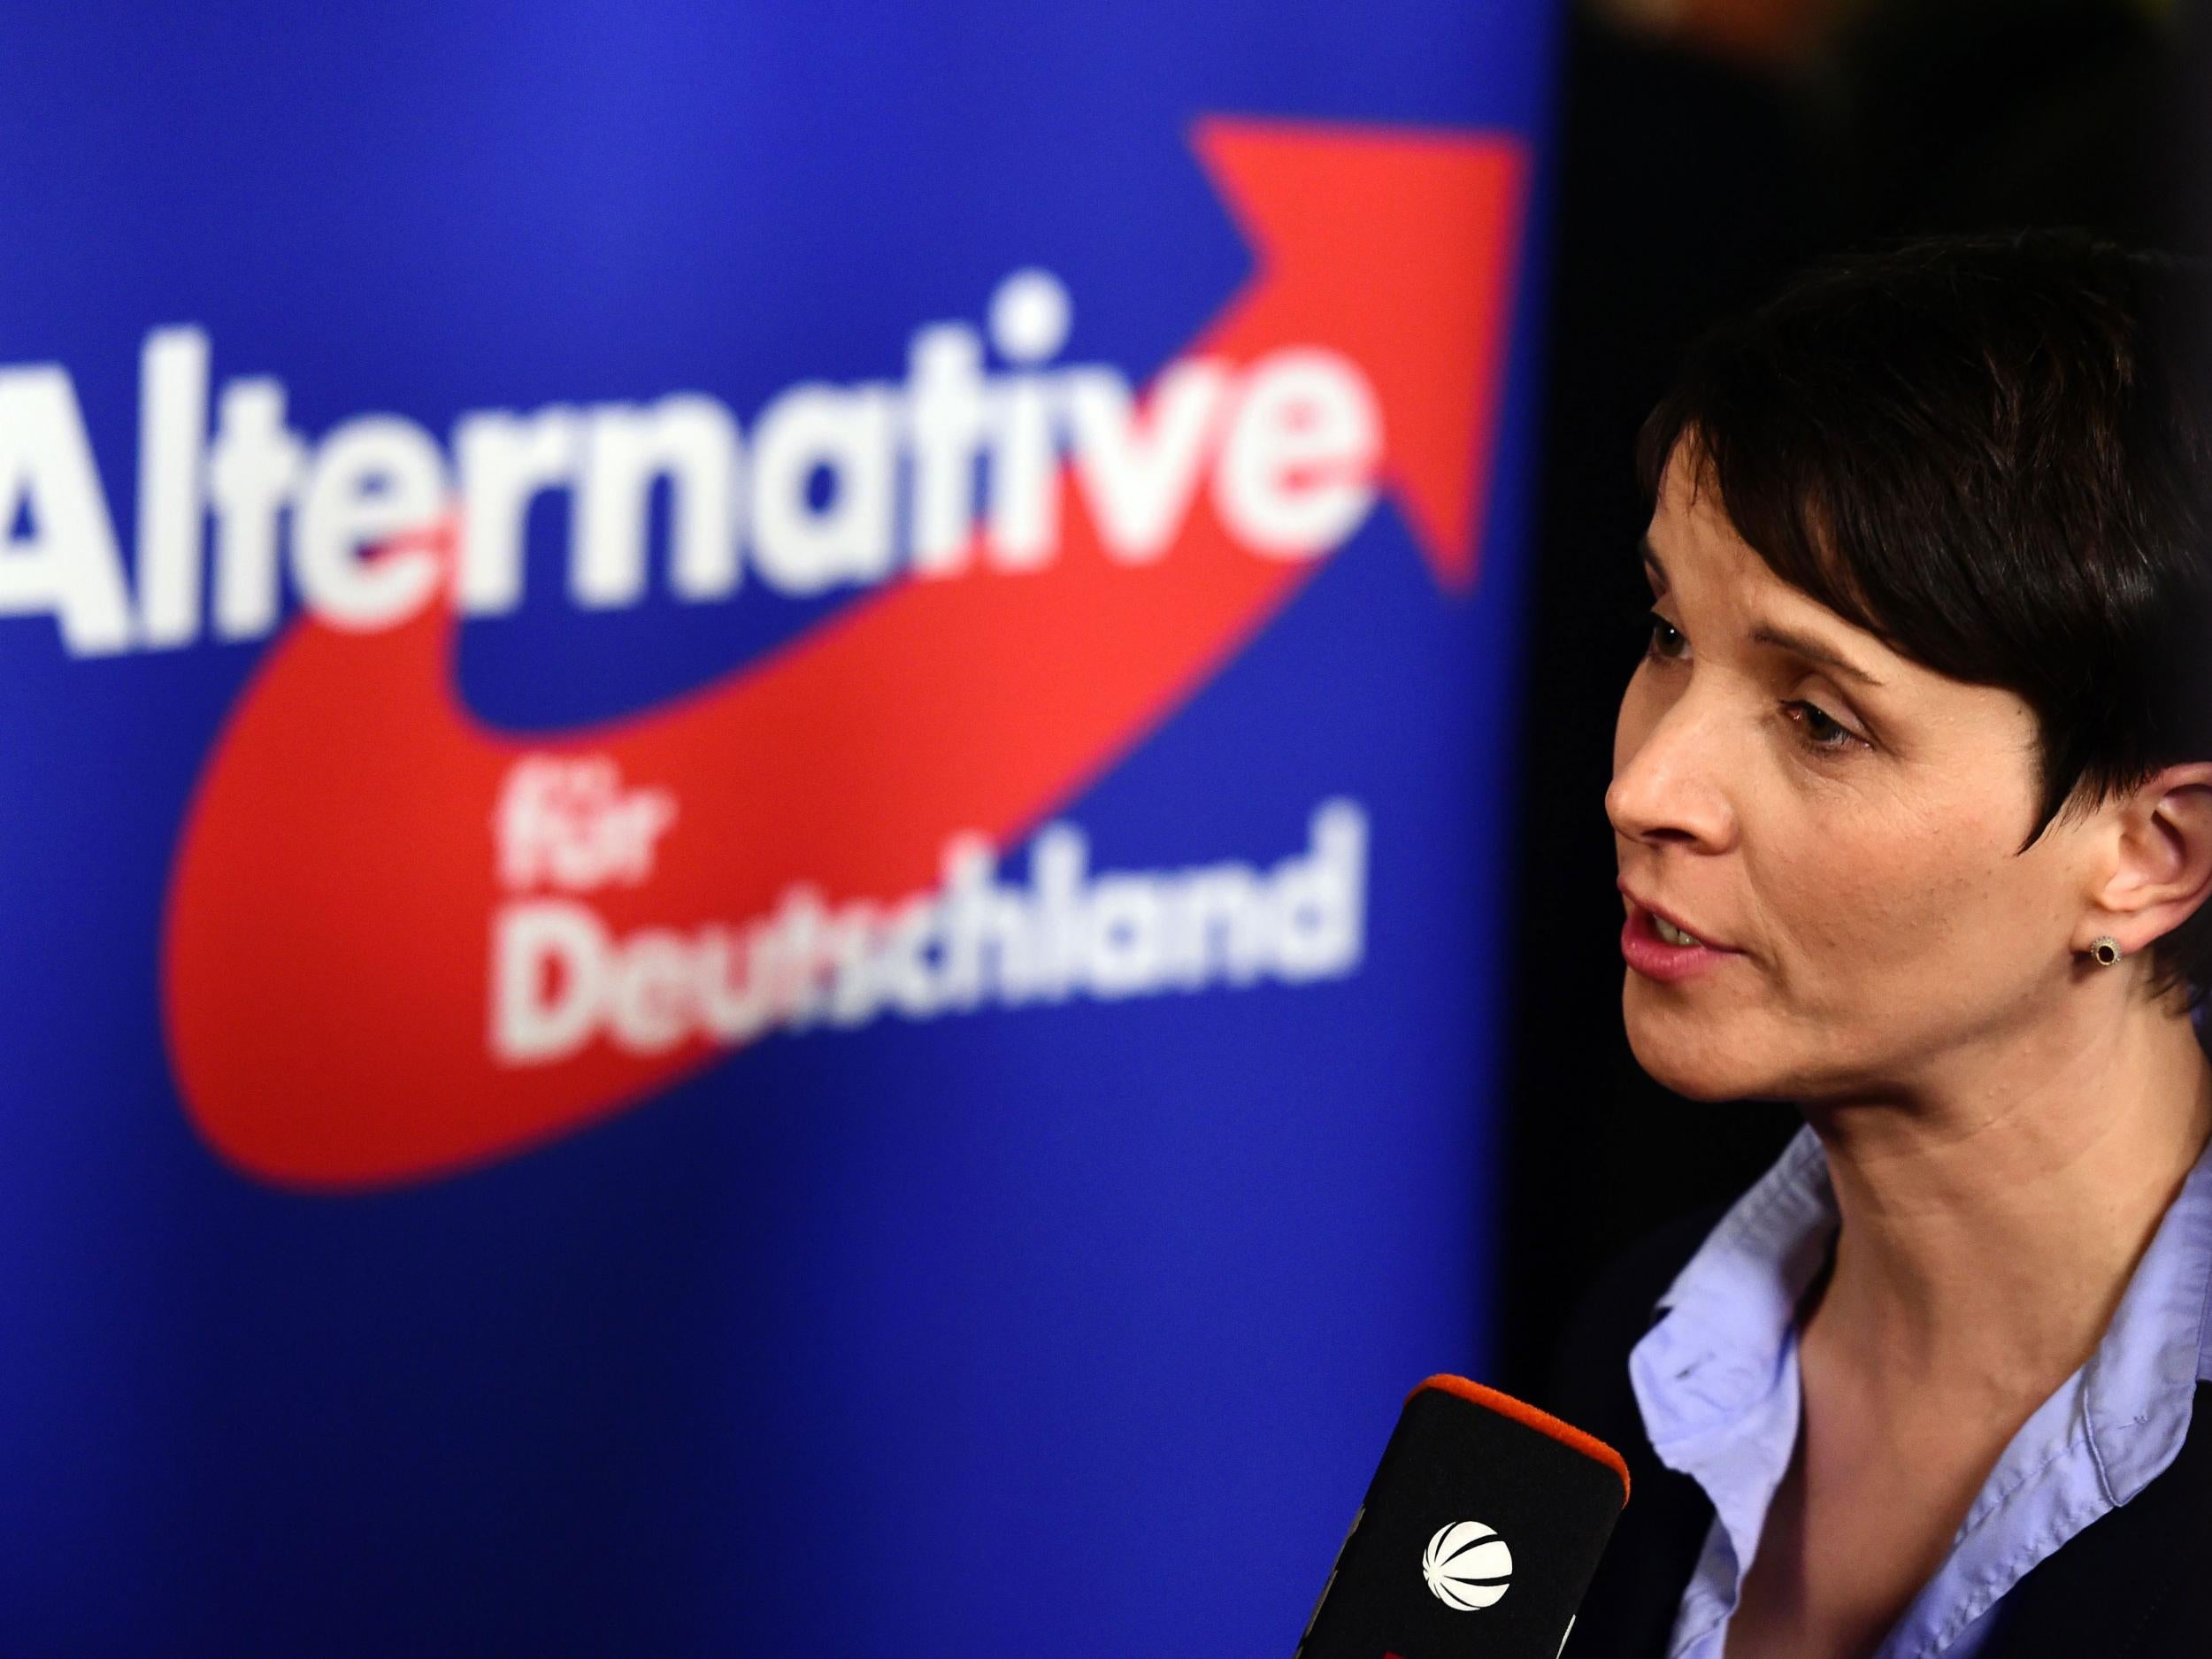 Frauke Petry, head of Alternative for Germany (AfD), won up to a quarter of the voting public in some regions last year